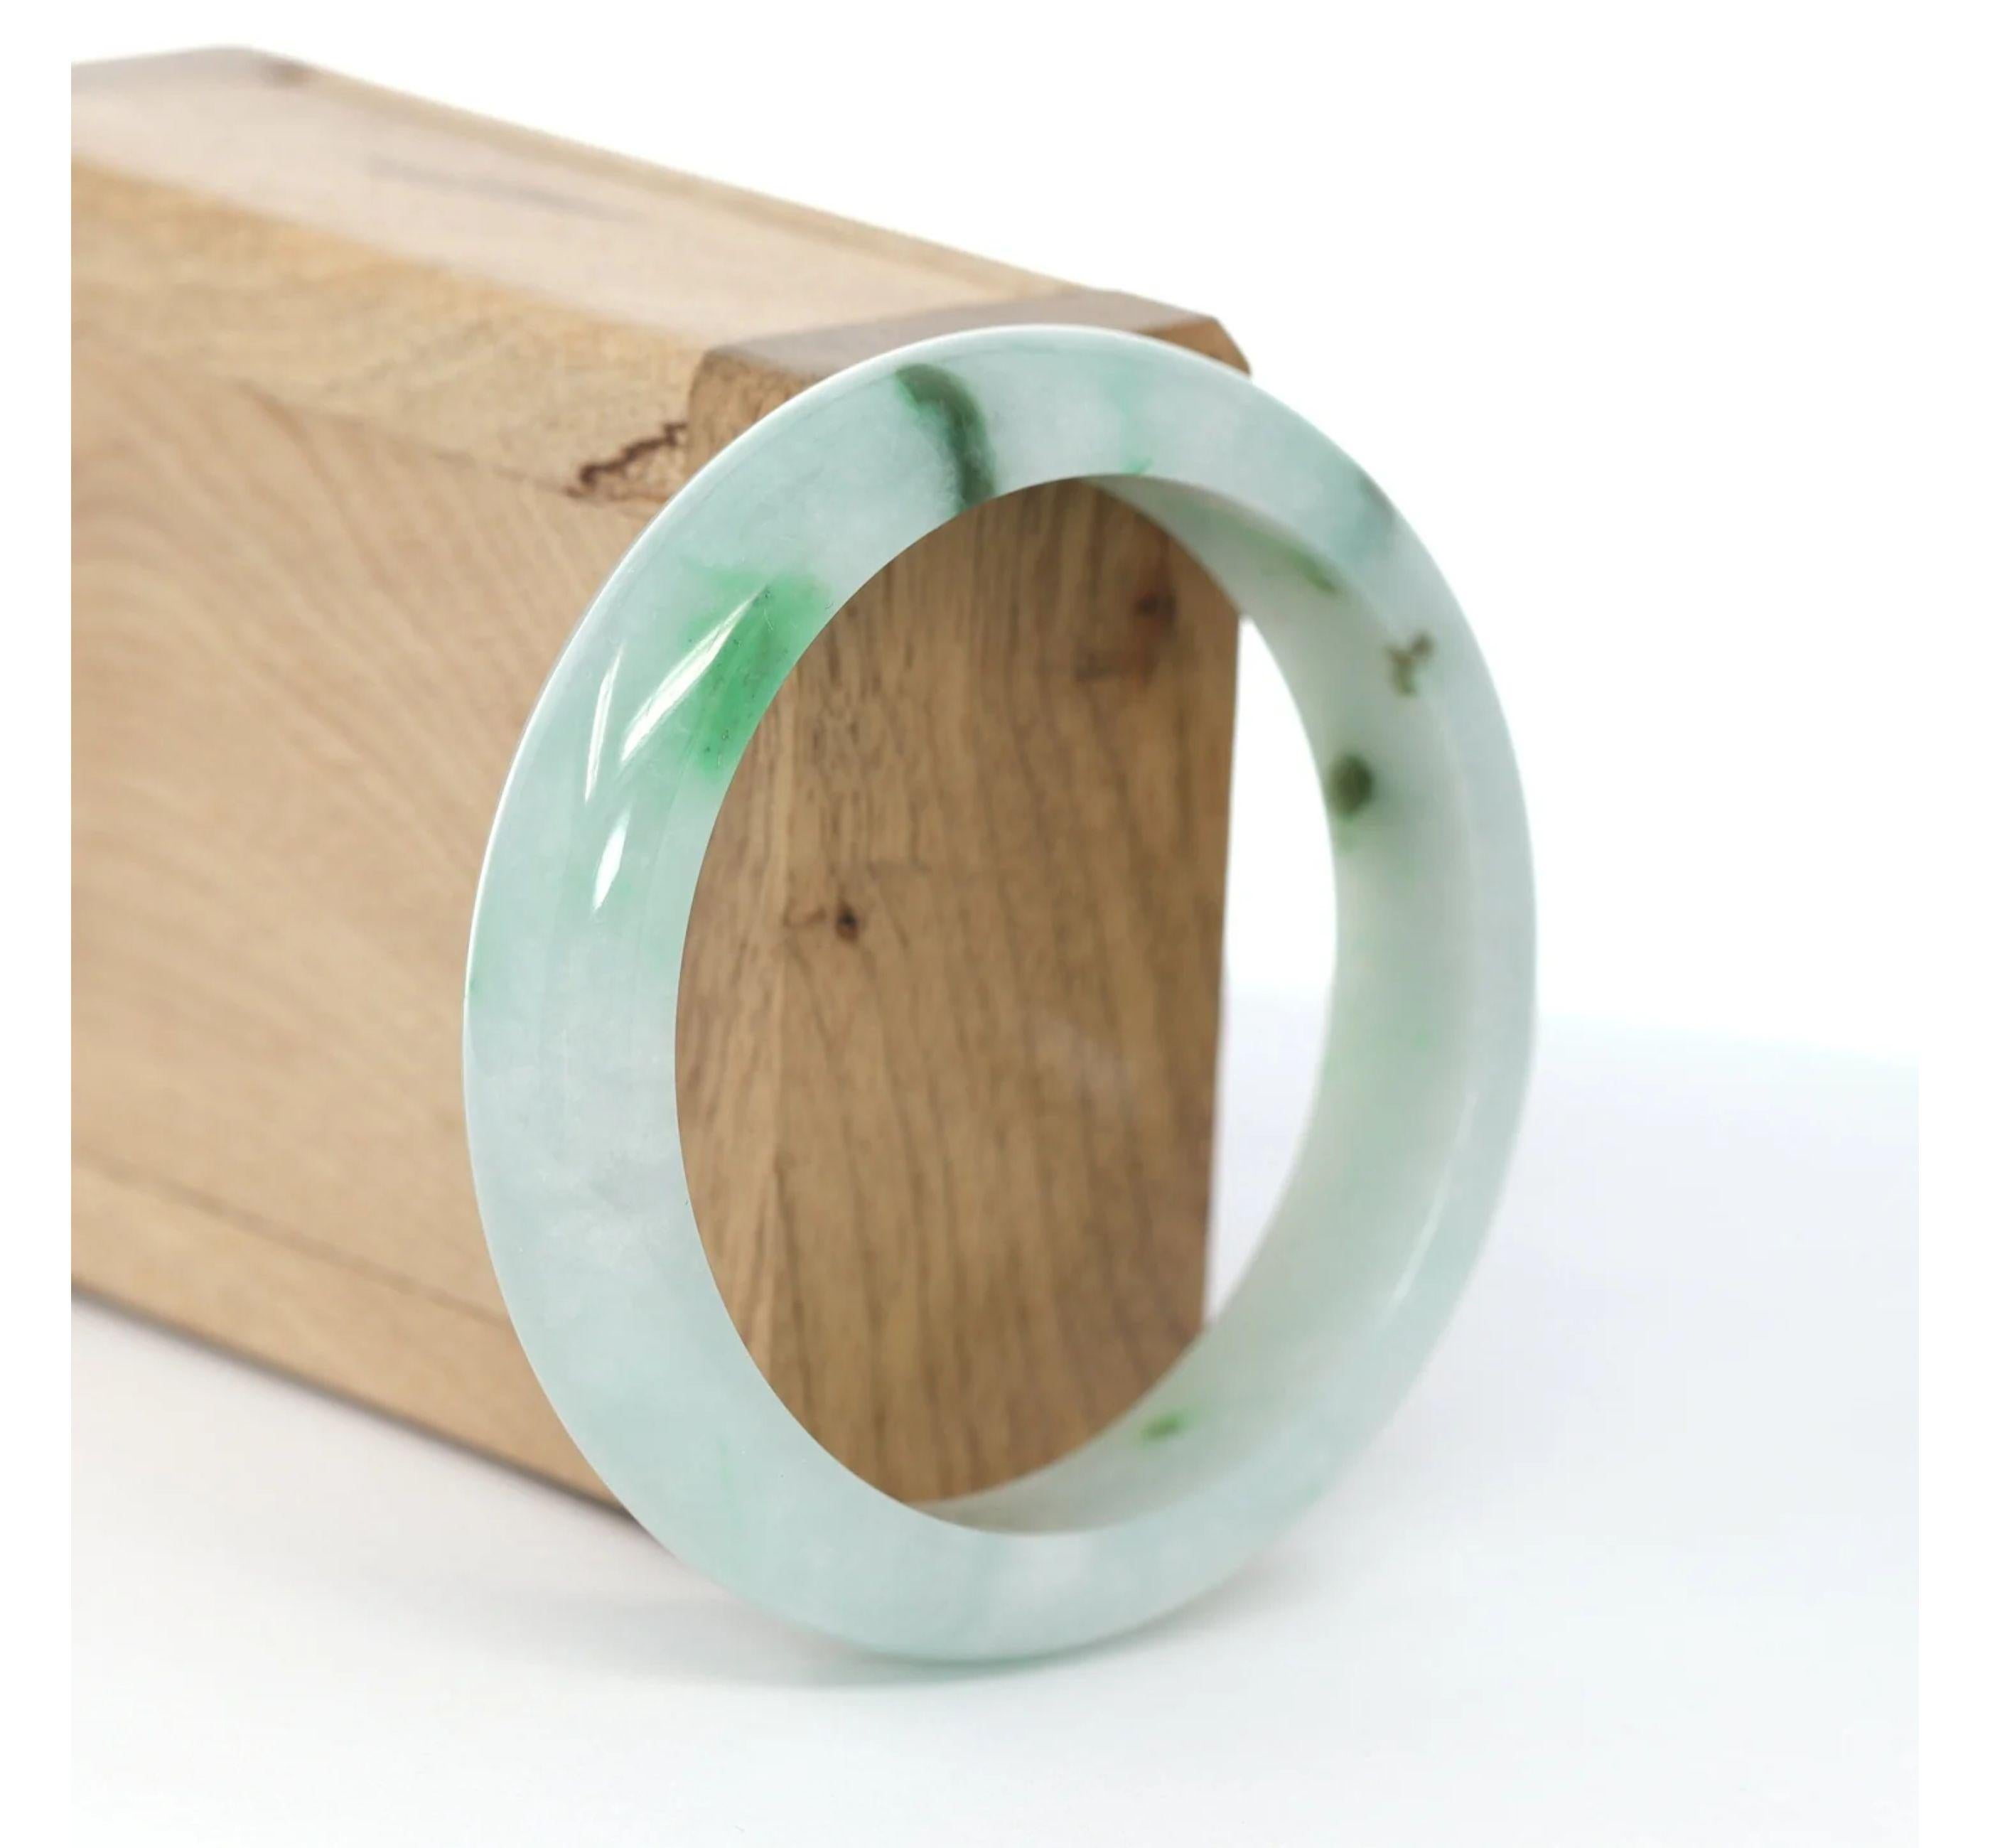 * DETAILS--- This Natural Burmese Jadeite Jade bangle is a beautiful green bangle. The texture is very smooth and clean even throughout the bangle, very beautifully translucent under the light. This bangle is characterized by beautiful green and